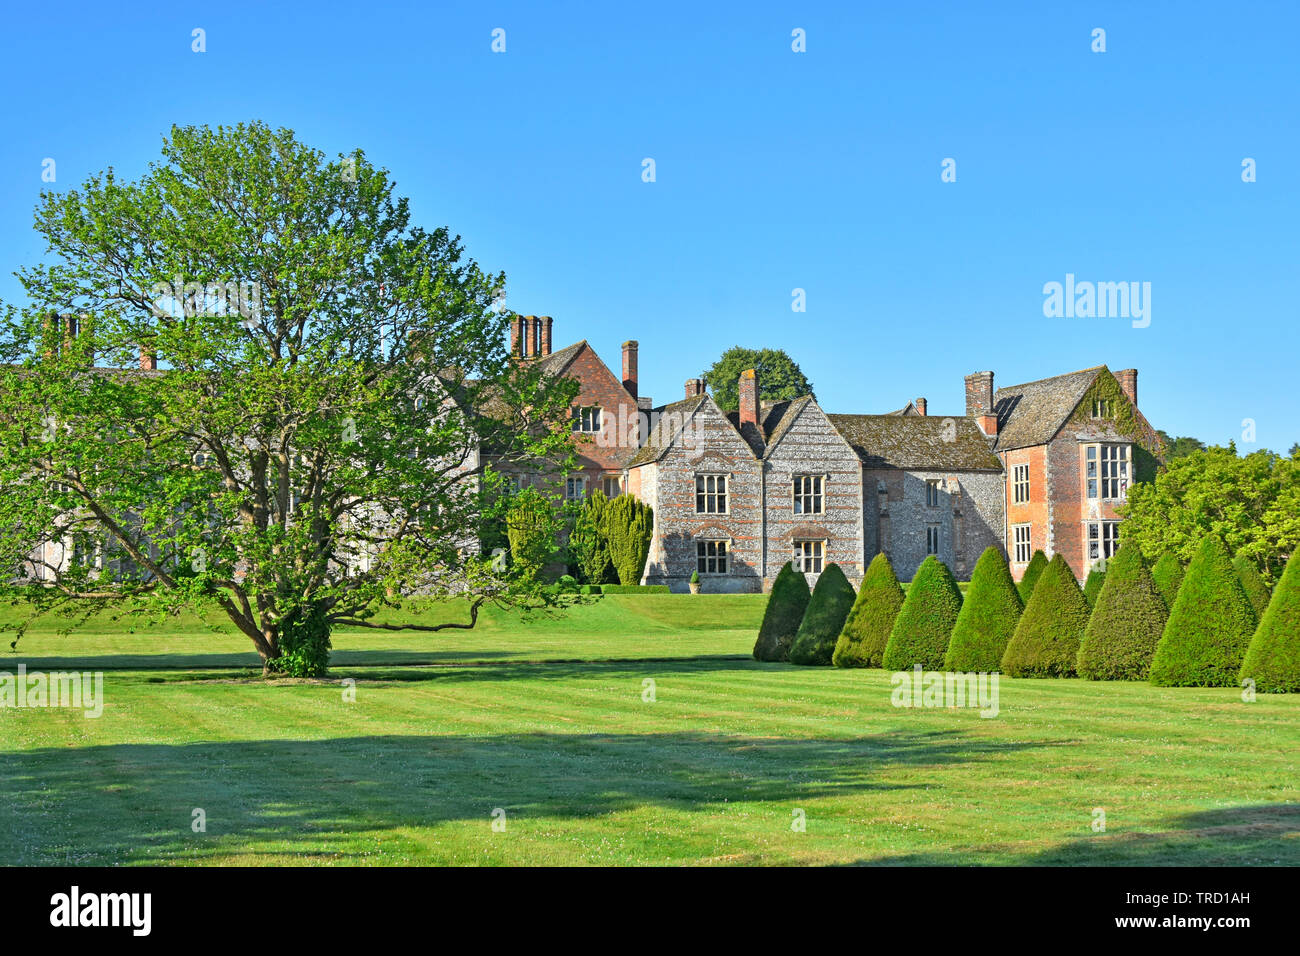 Elizabethan hotel with rural garden topiary & grass lawn in historic parkland & gardens rows of conifers Littlecote House beyond Wiltshire England UK Stock Photo